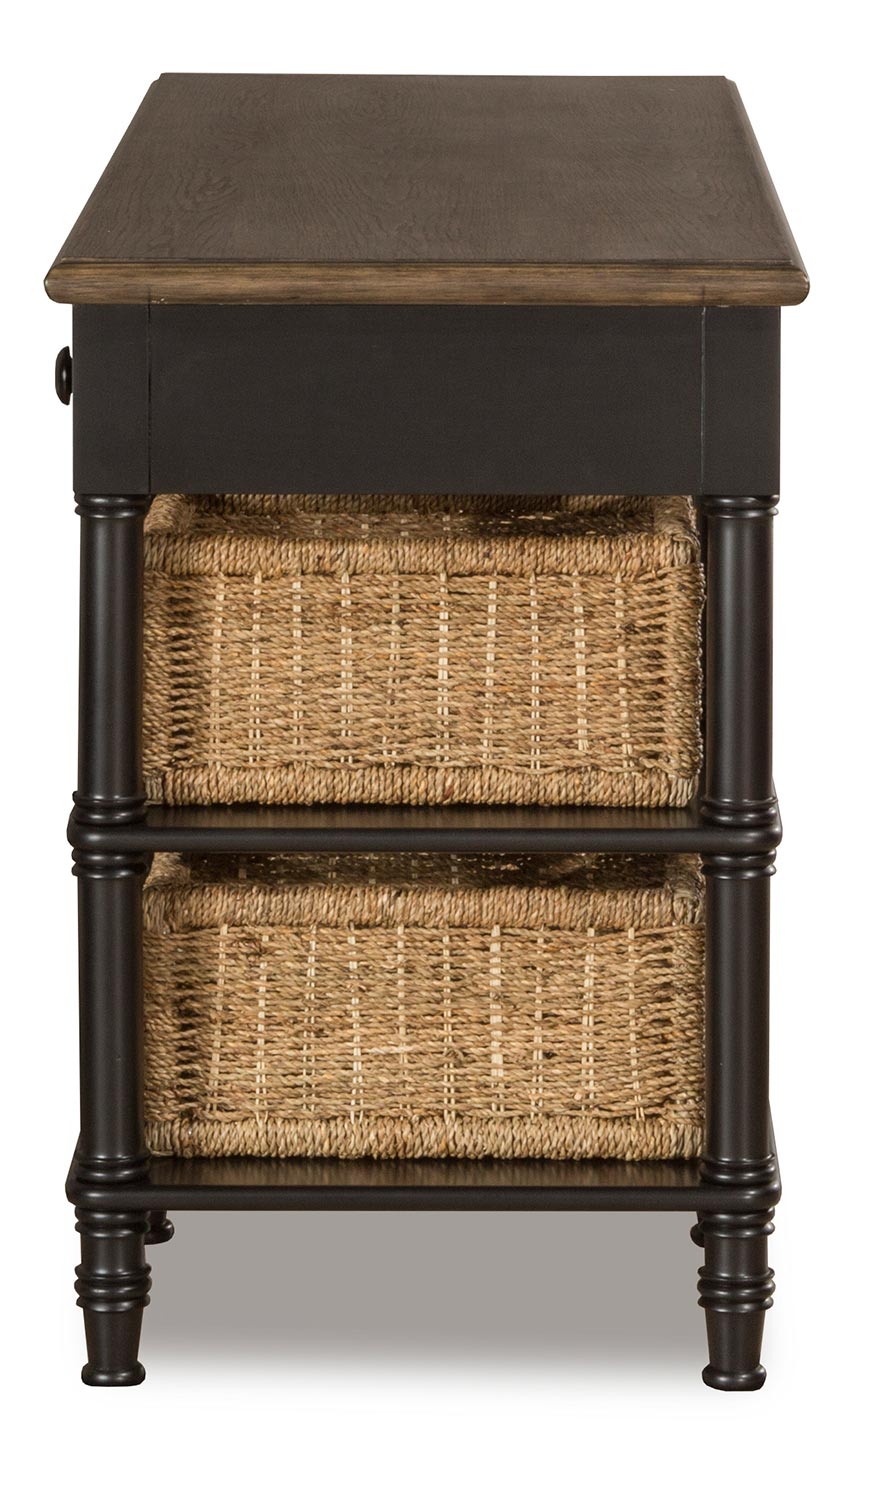 Hillsdale Seneca Desk with 4 Baskets - Waxed Black/Natural Seagrass